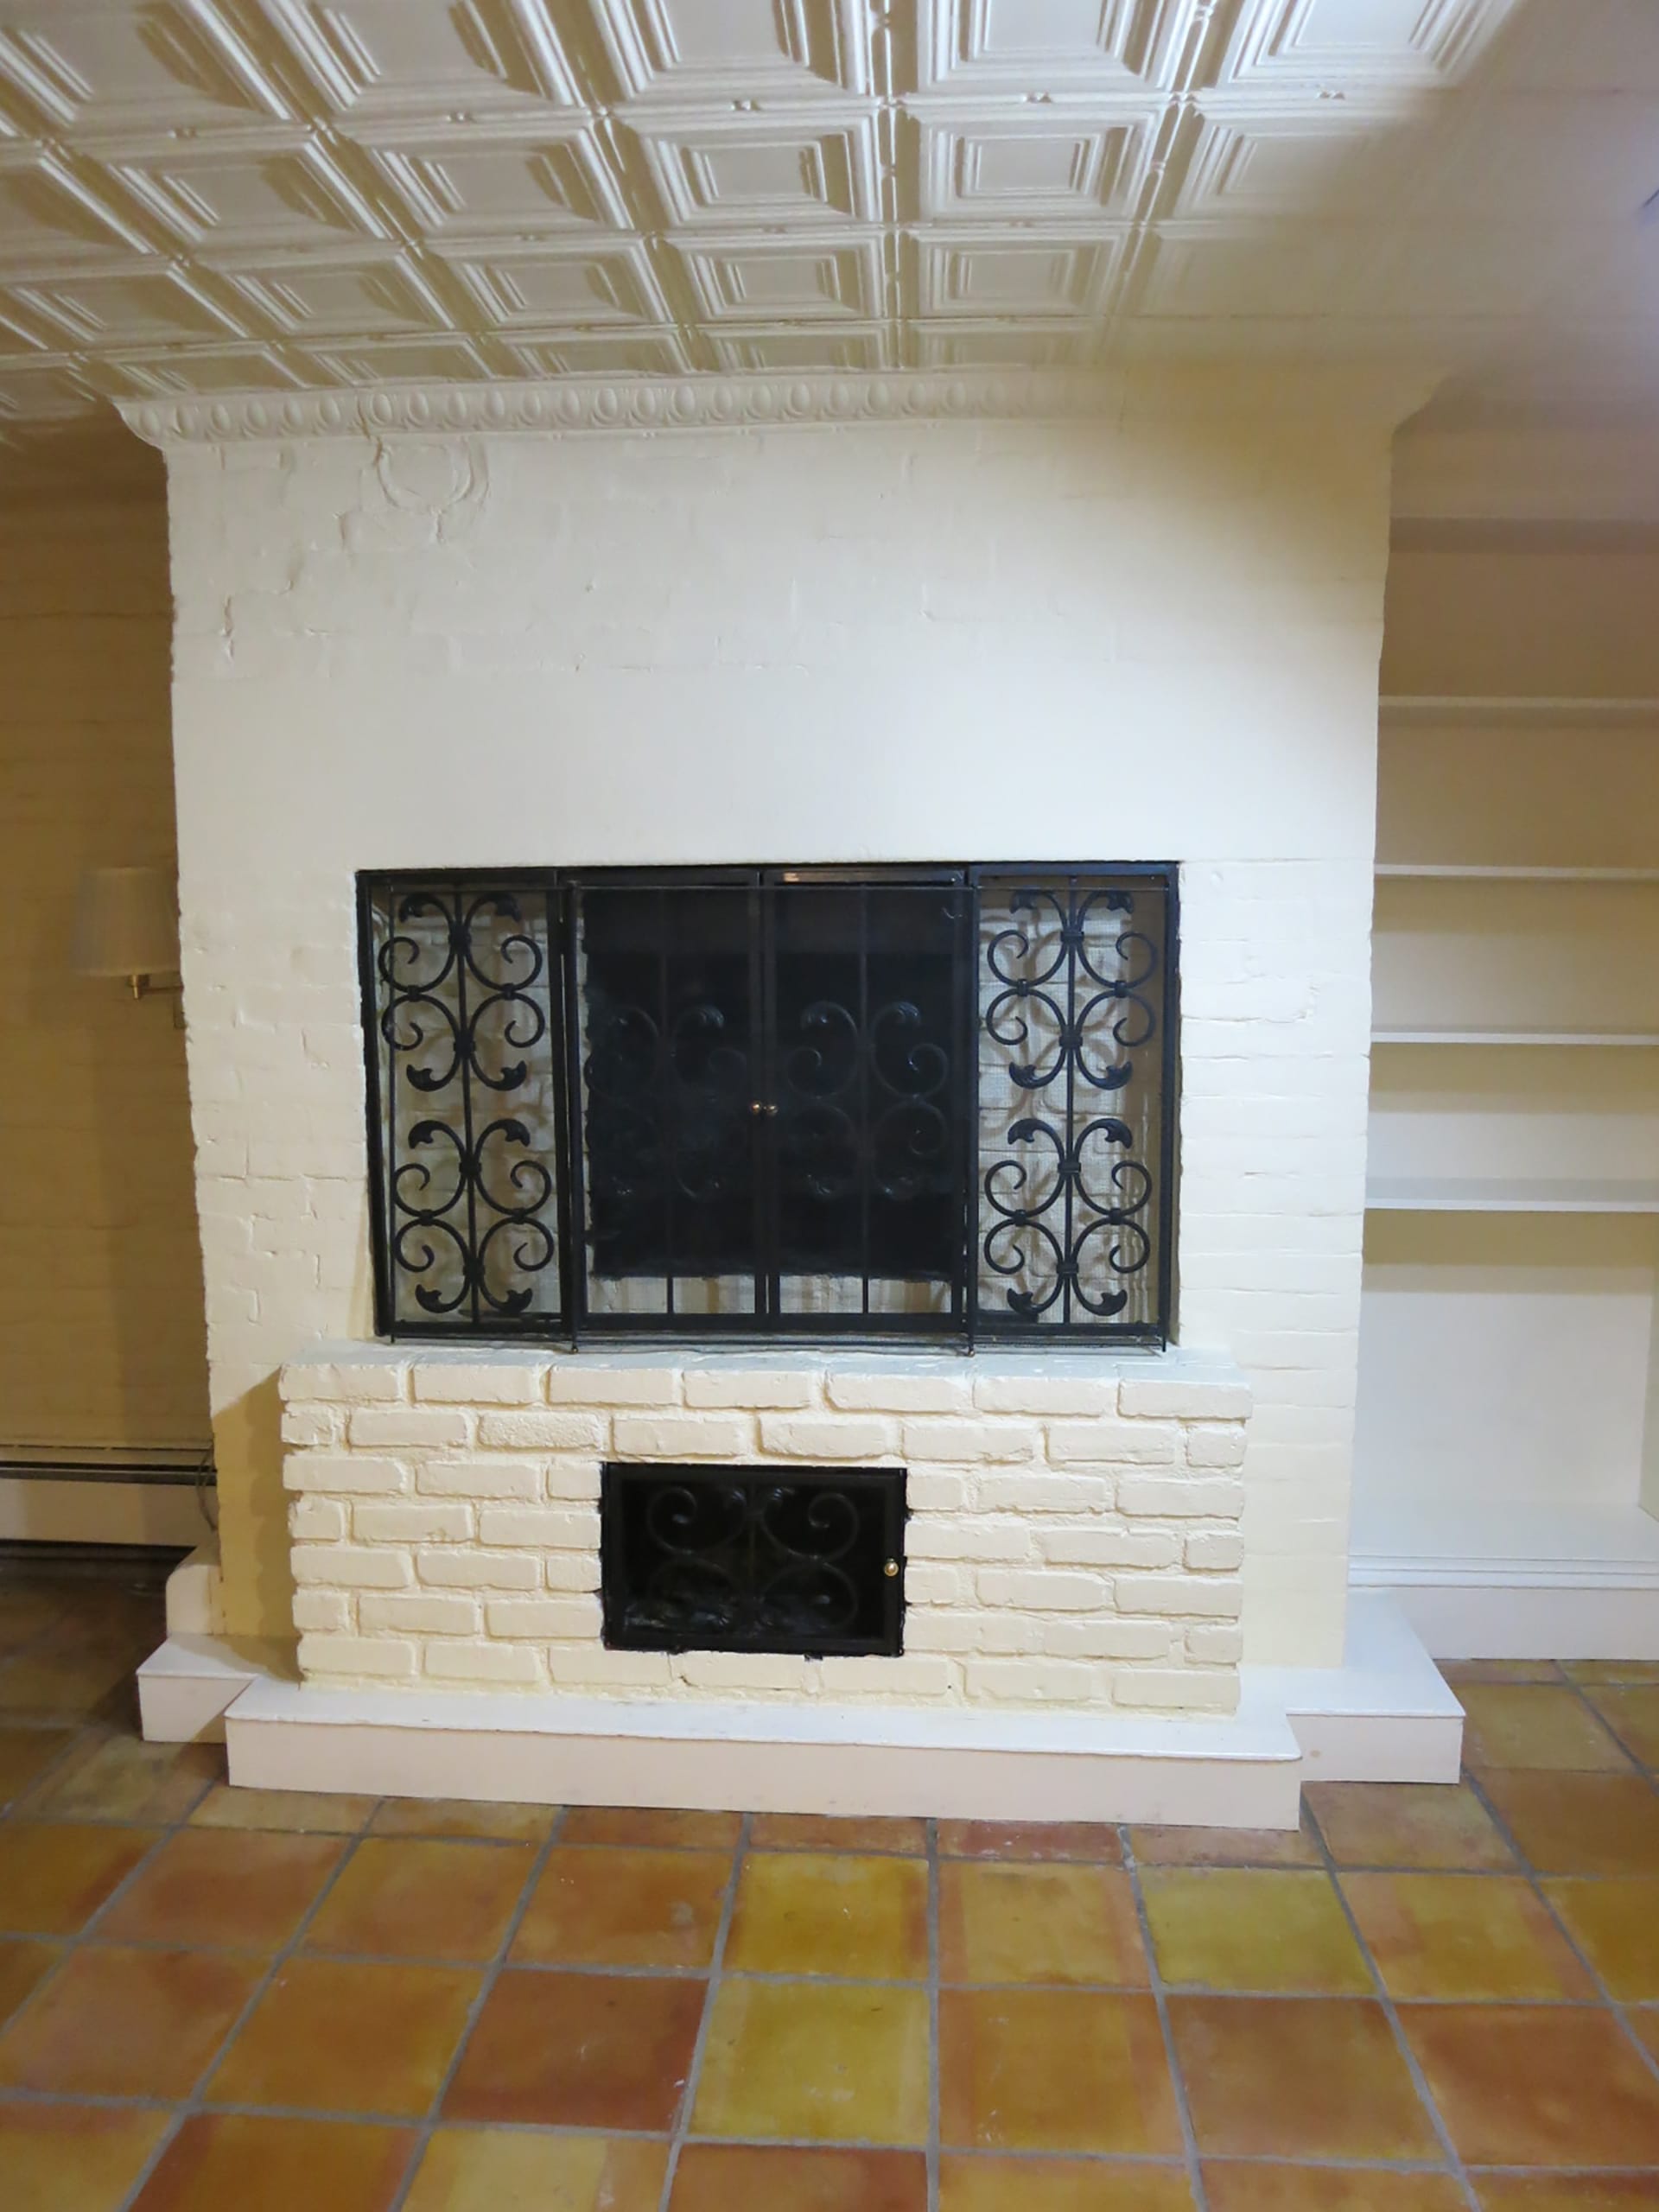 An original cooking fireplace in the basement of an 1840s Gothic Revival home in Brooklyn Heights, New York